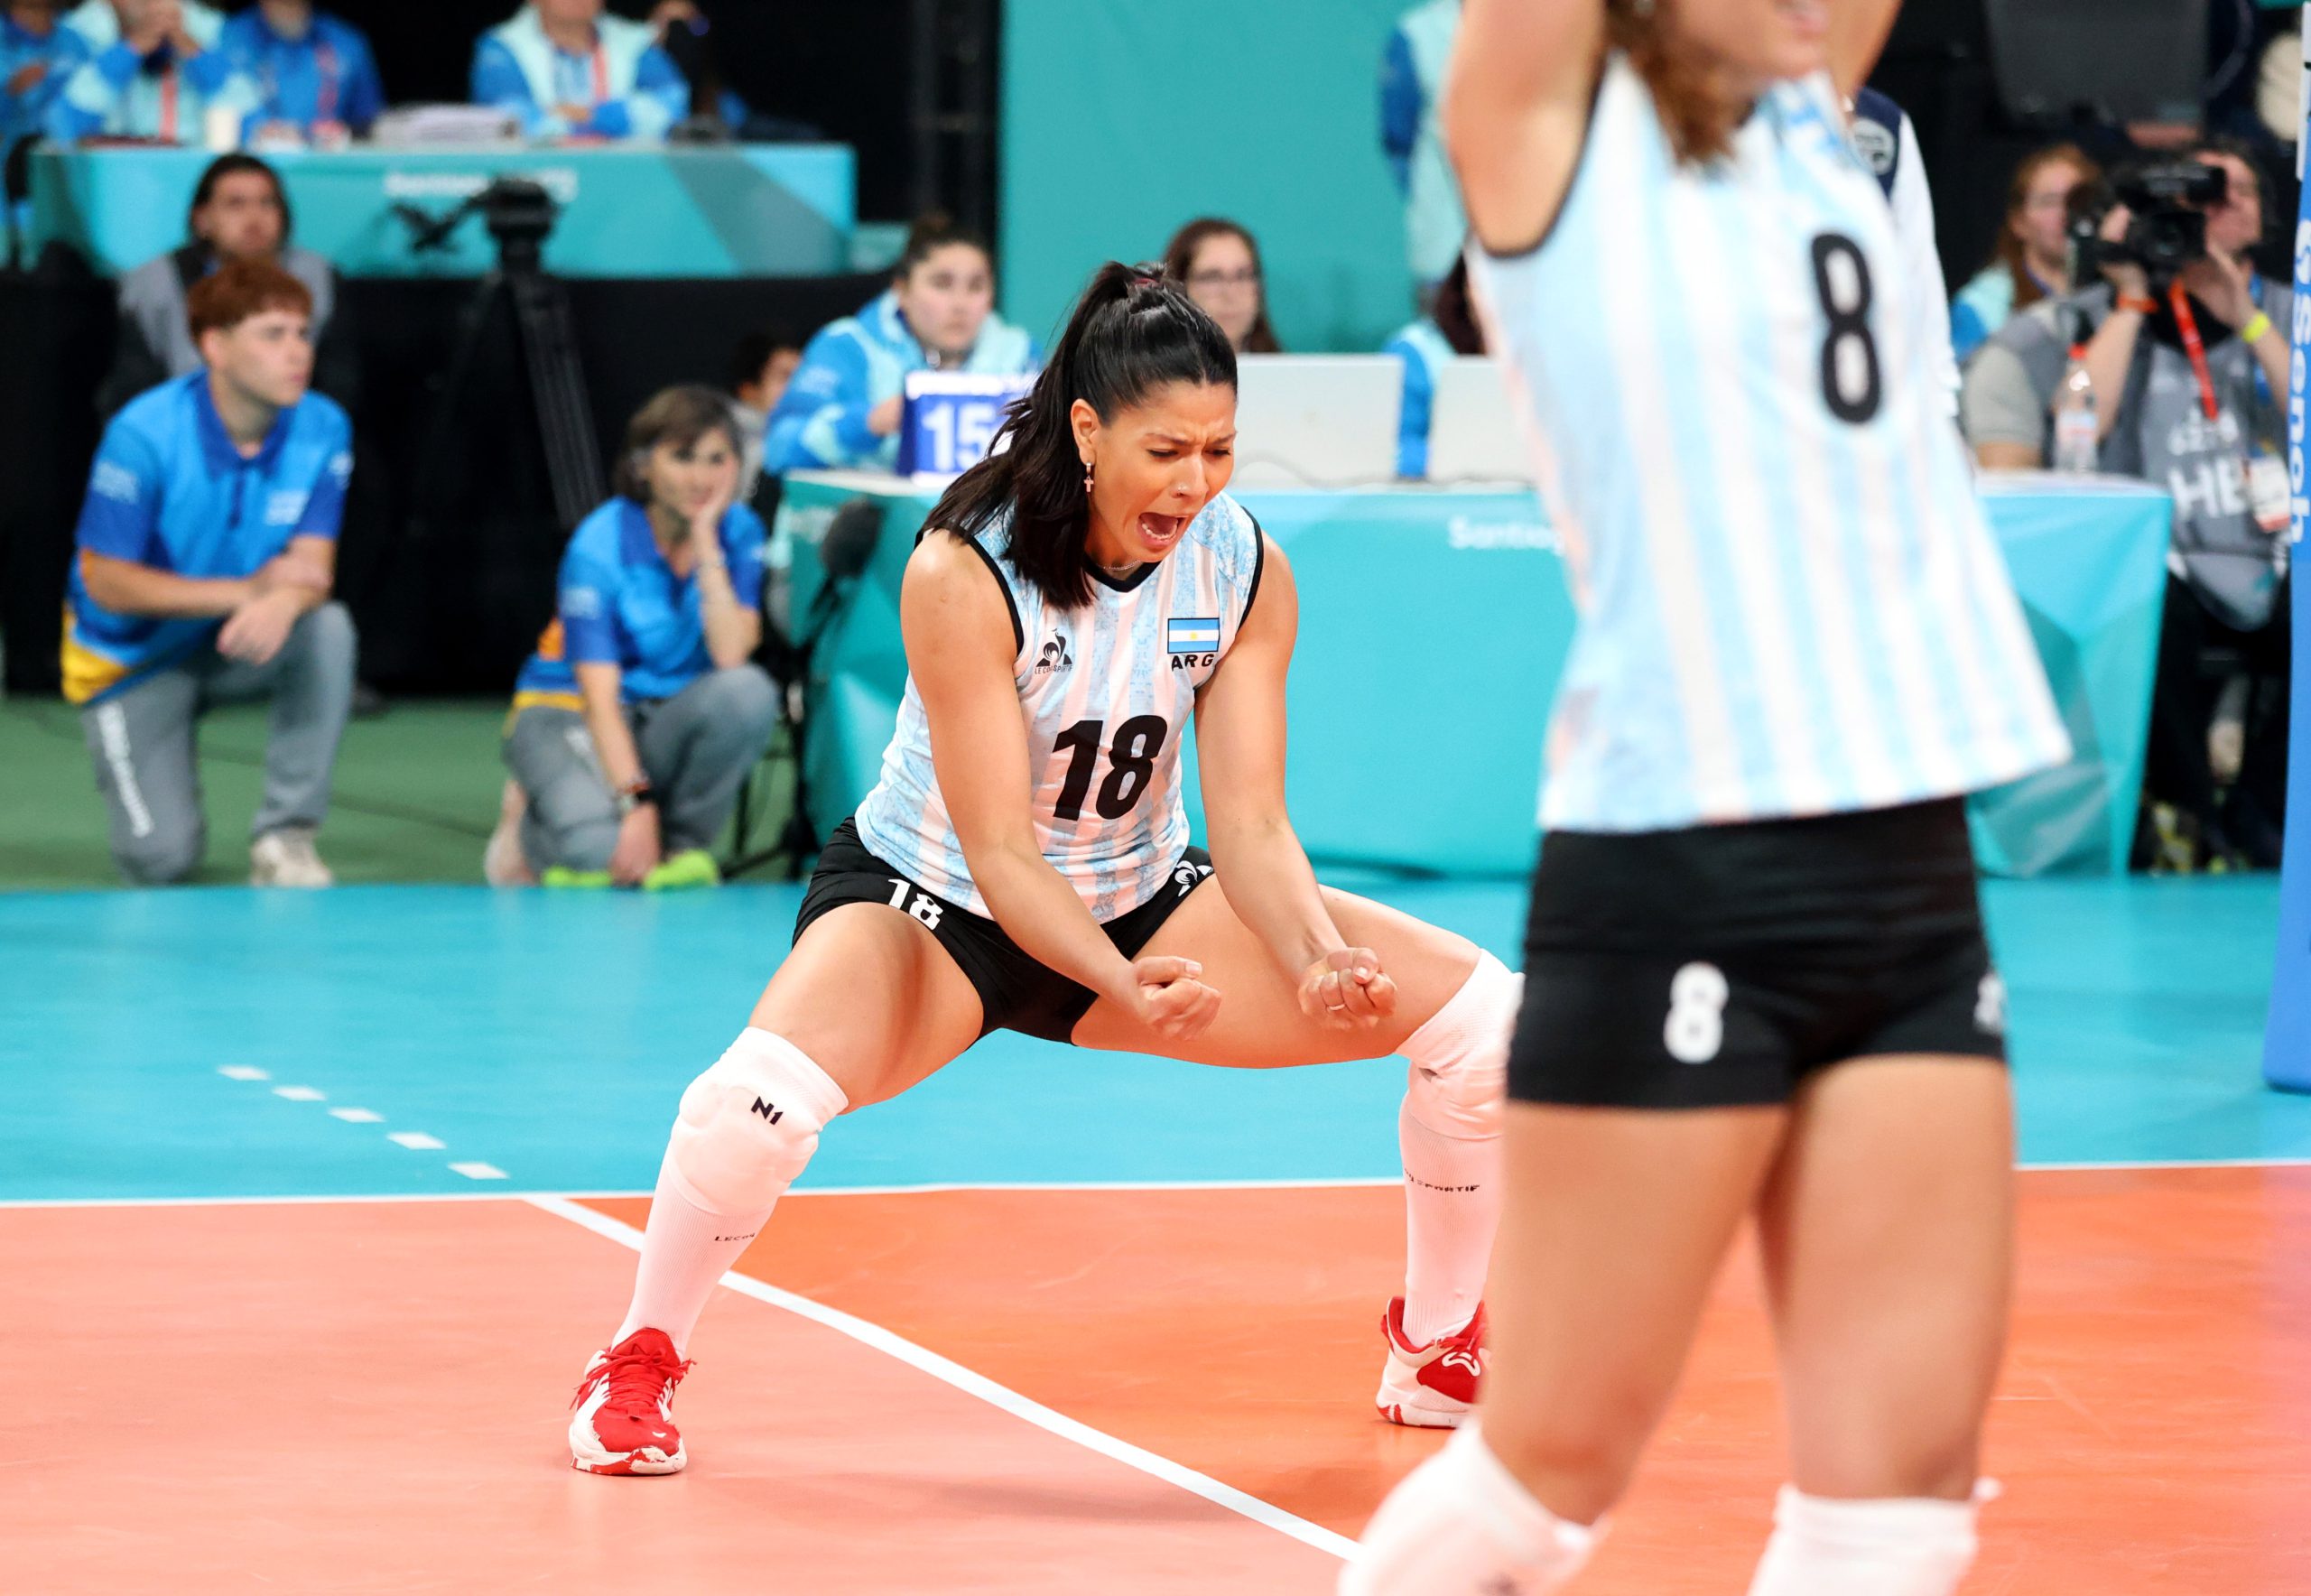 Argentina starts the Pan American Games with win over Puerto Rico